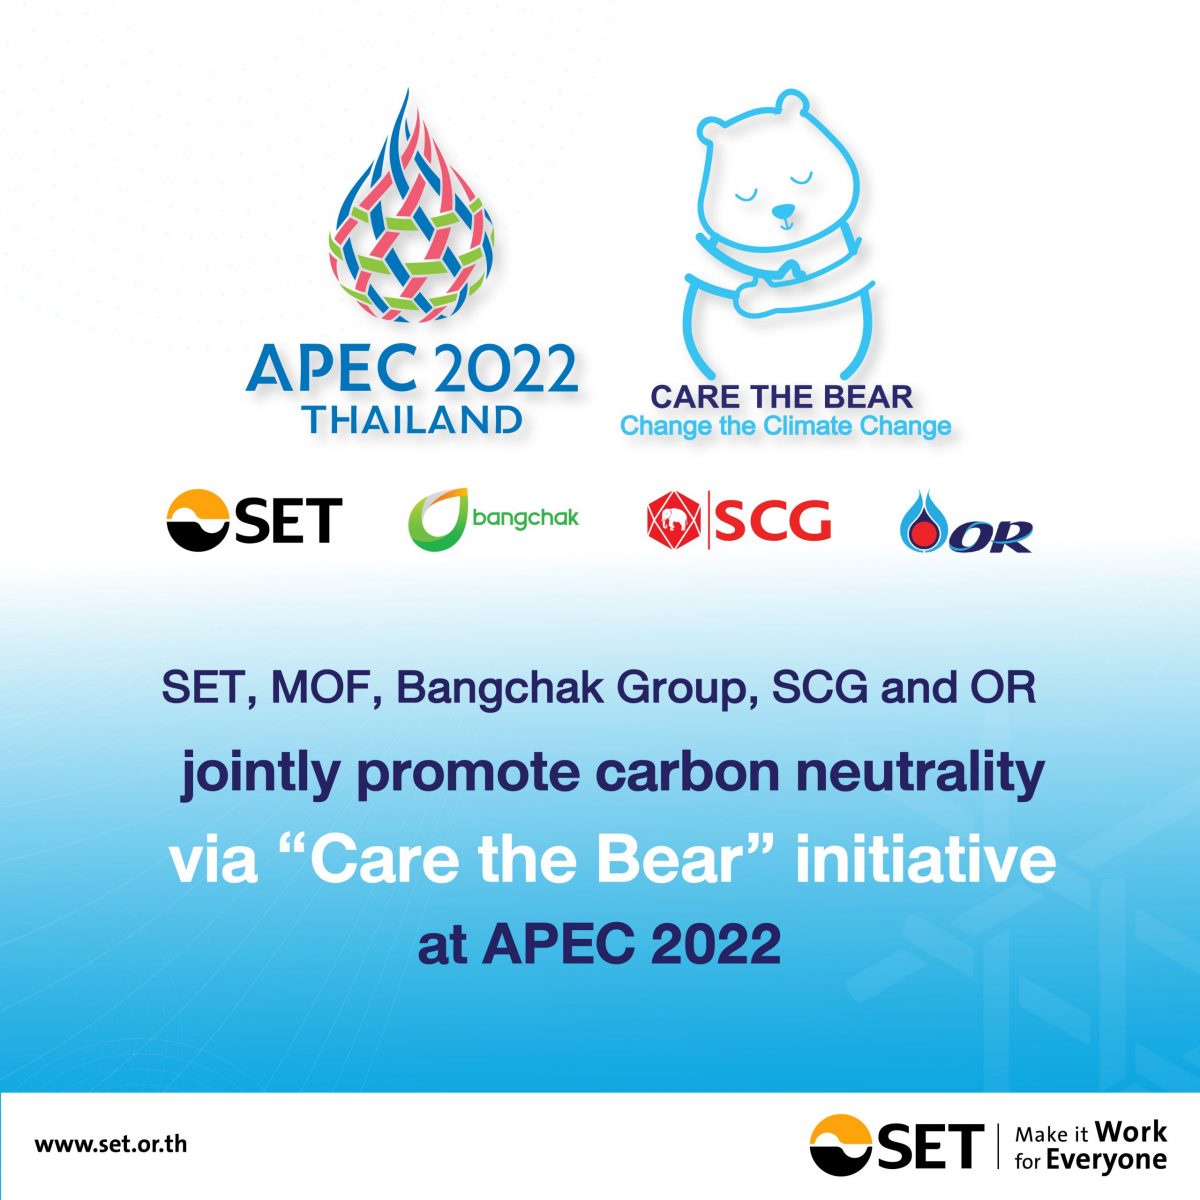 SET, MOF, Bangchak Group, SCG and OR jointly promote carbon neutrality via Care the Bear initiative at APEC